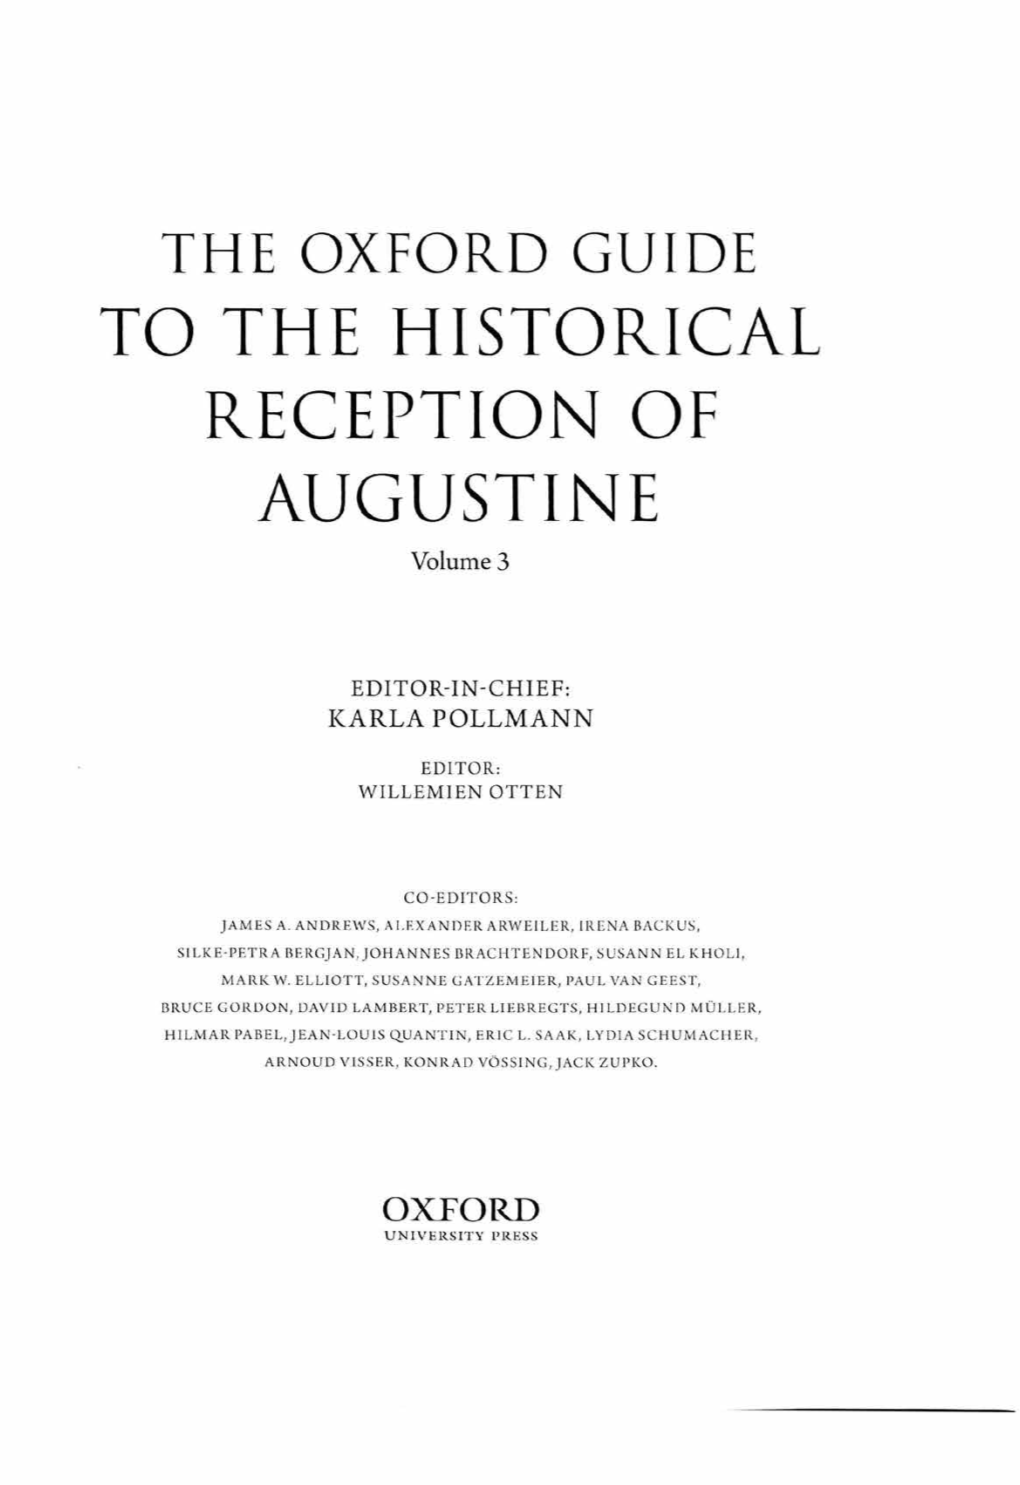 TO the HISTORICAL RECEPTION of AUGUSTINE Volume 3